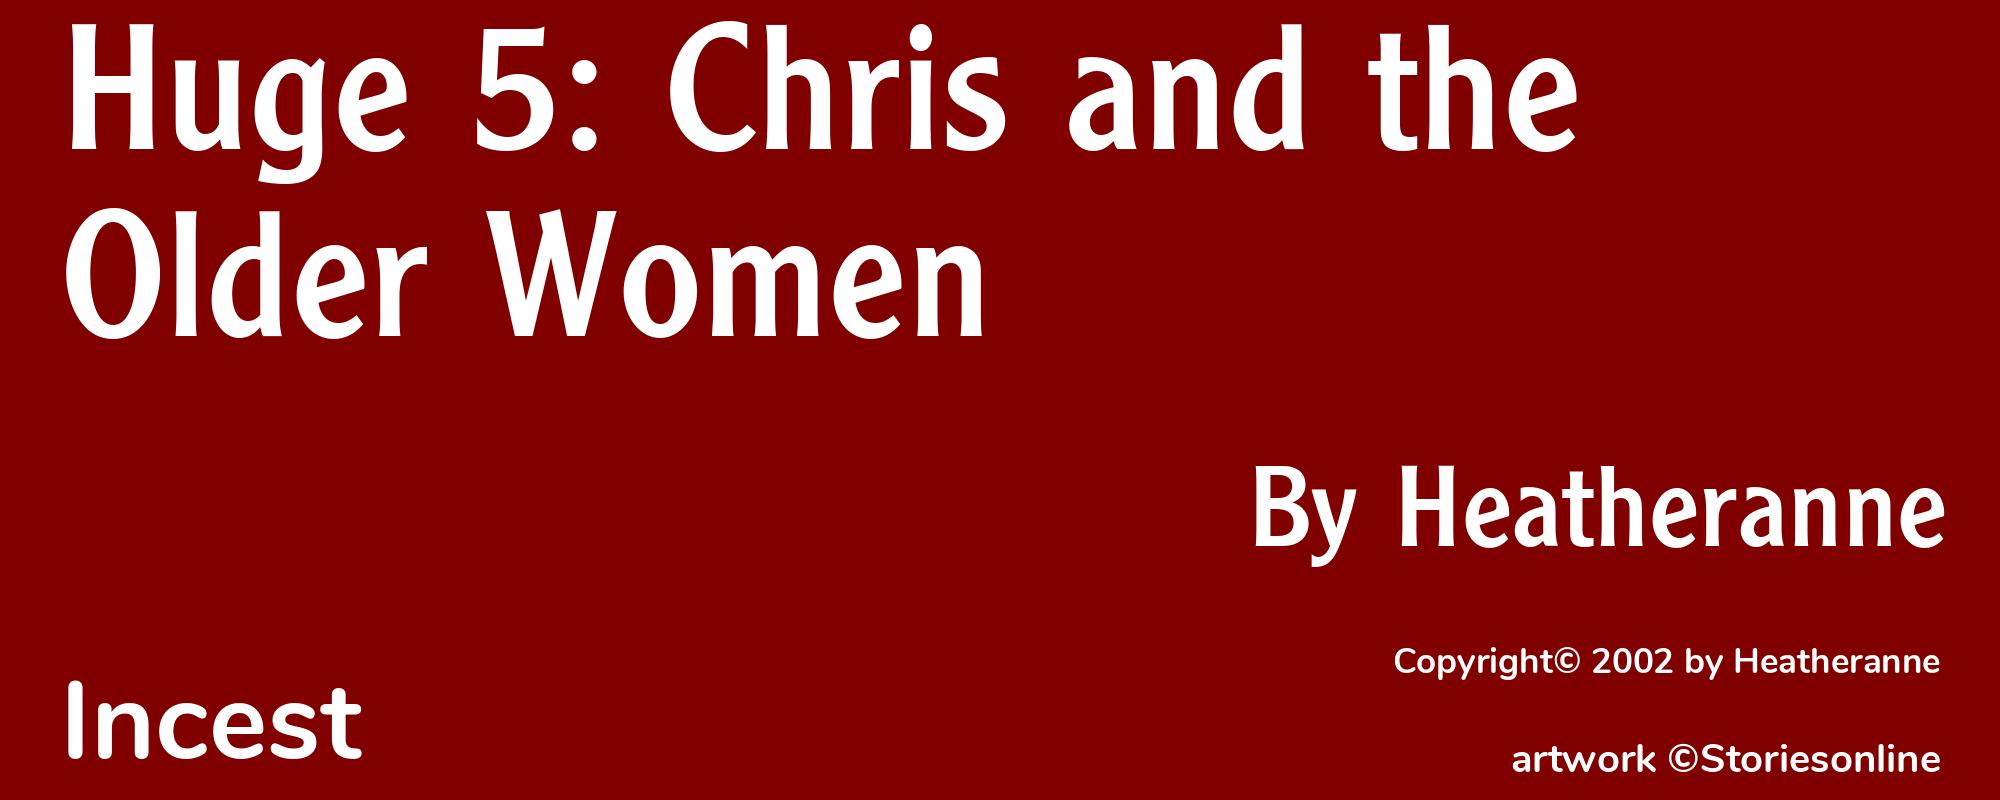 Huge 5: Chris and the Older Women - Cover